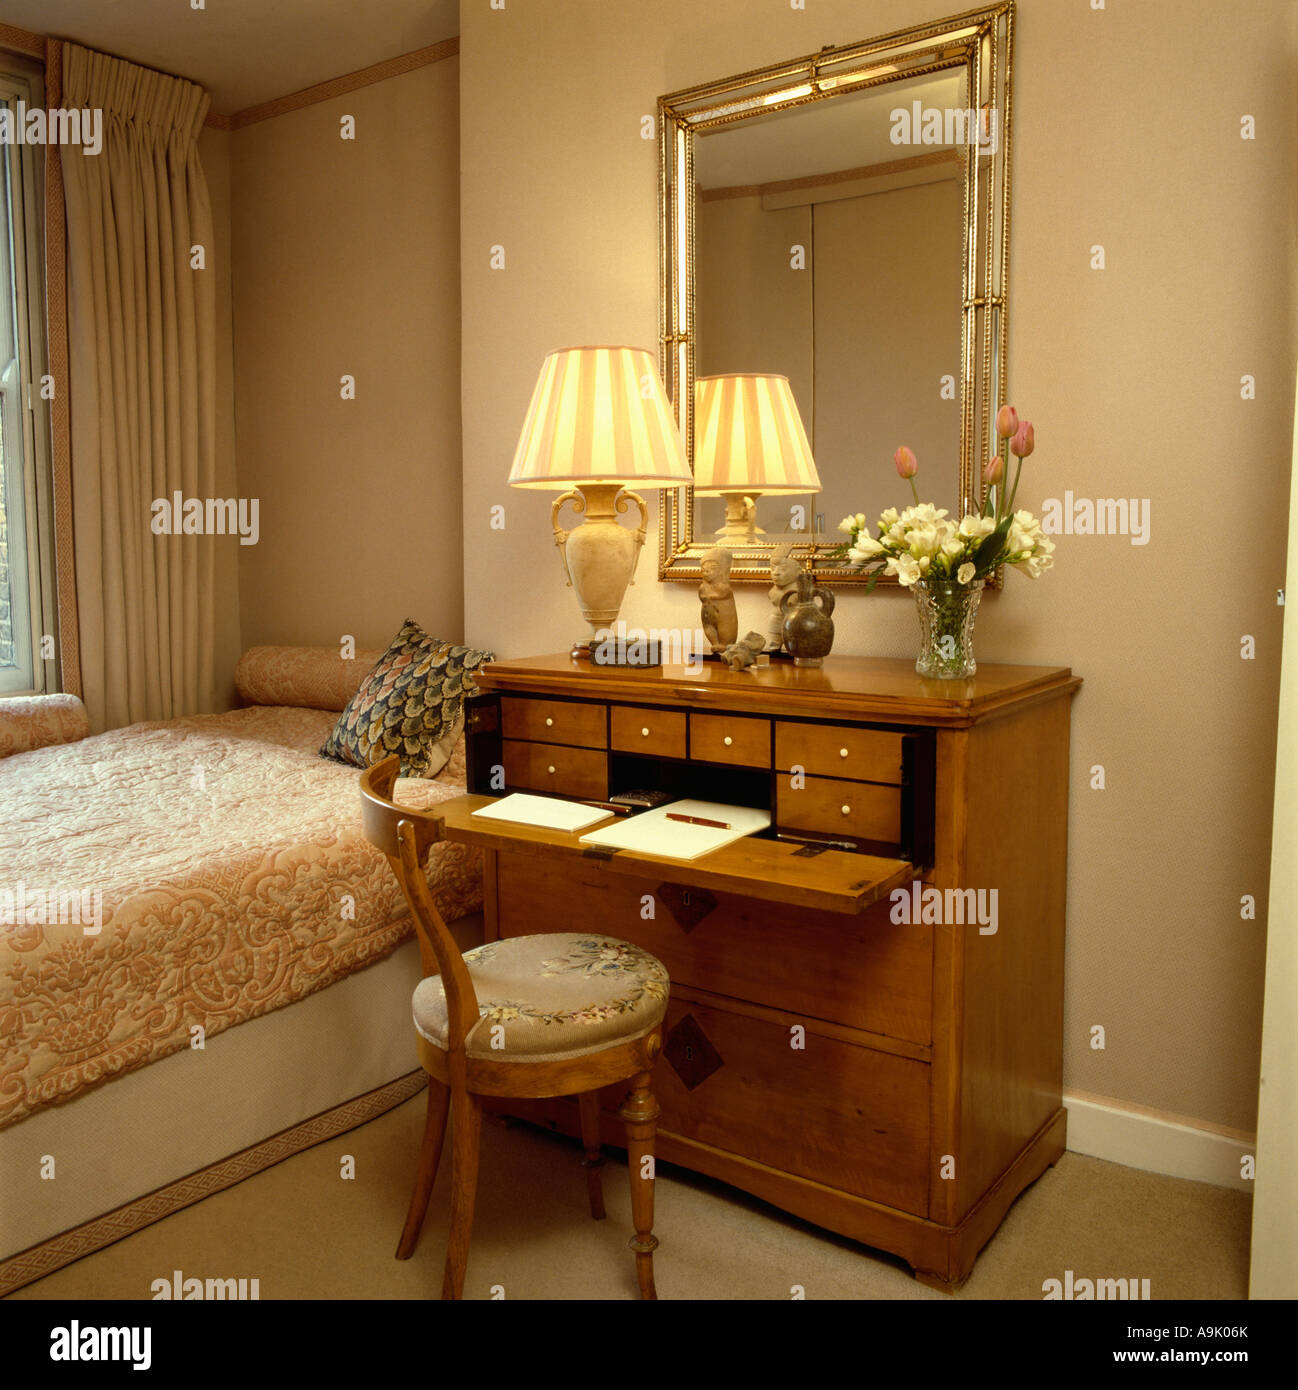 Mirror Above Antique Desk With Lighted Lamp In Neutral Guest Room